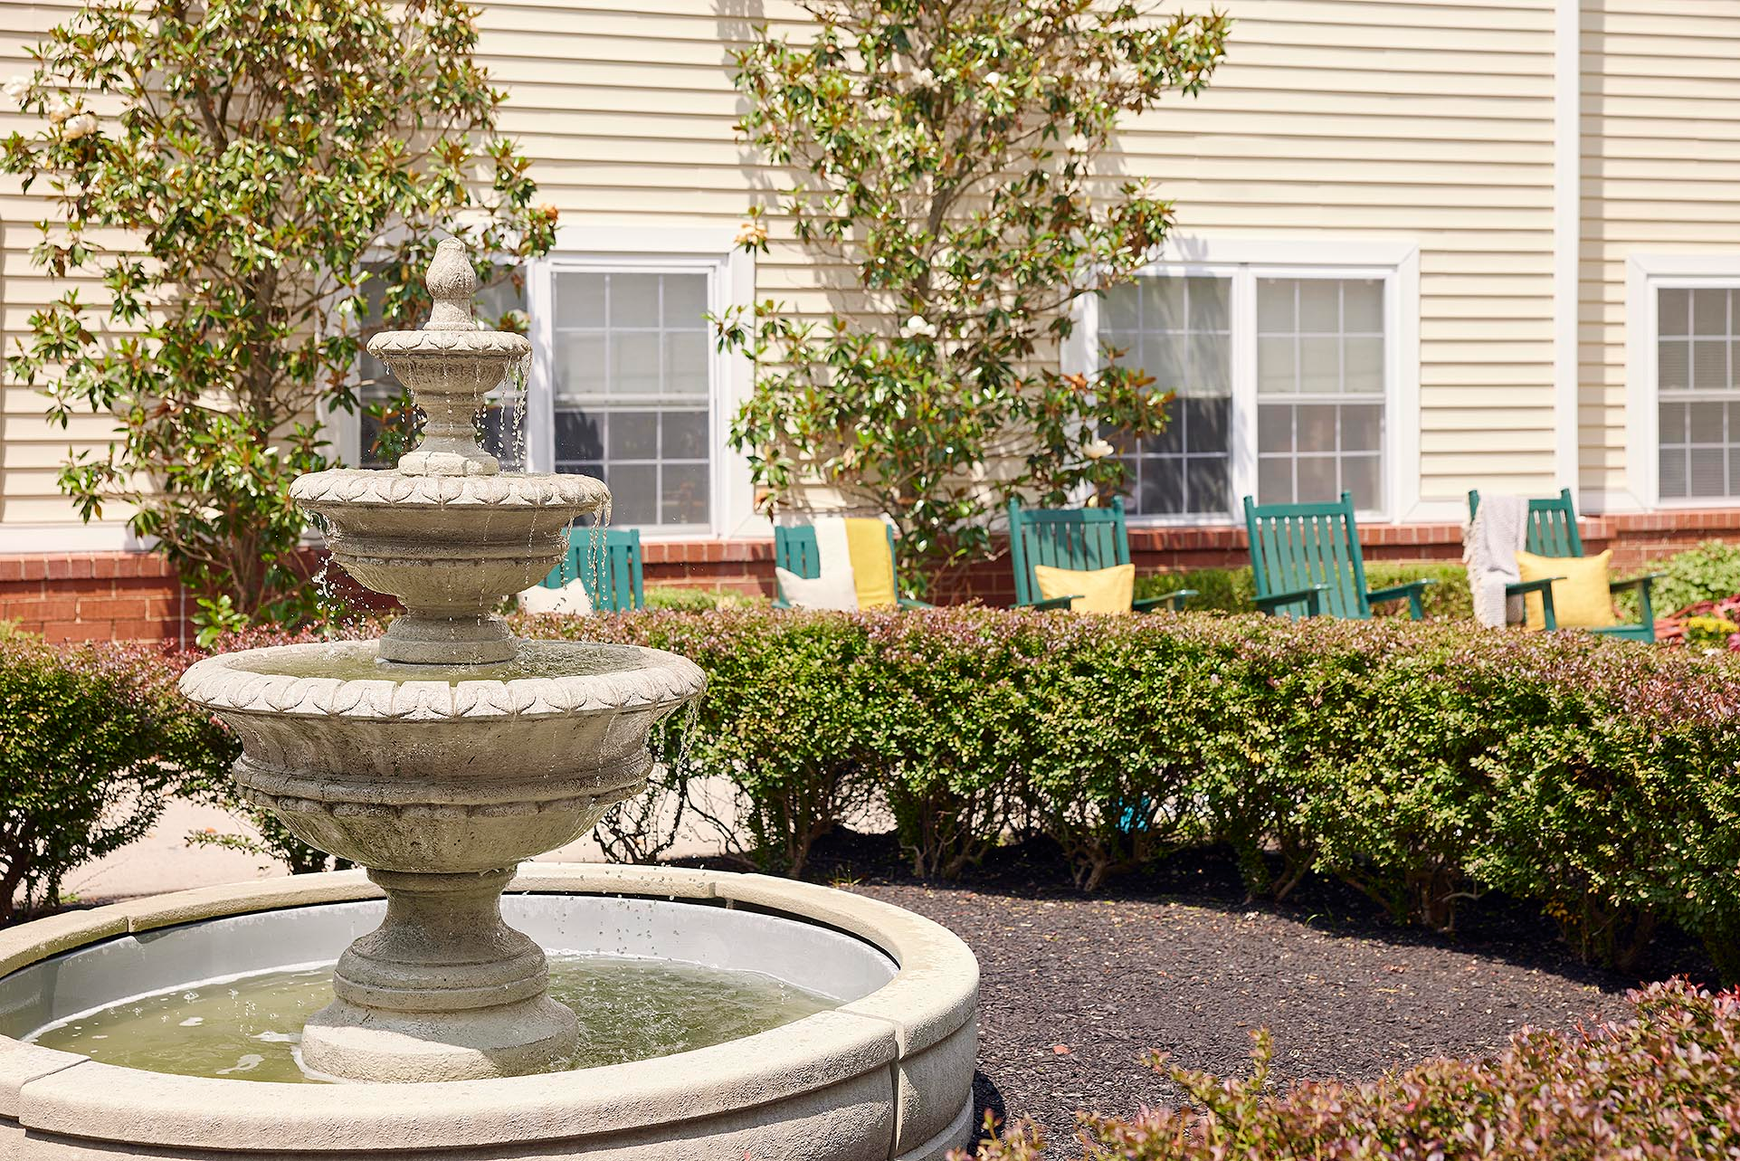 Enjoy the fountain from your rocking chair